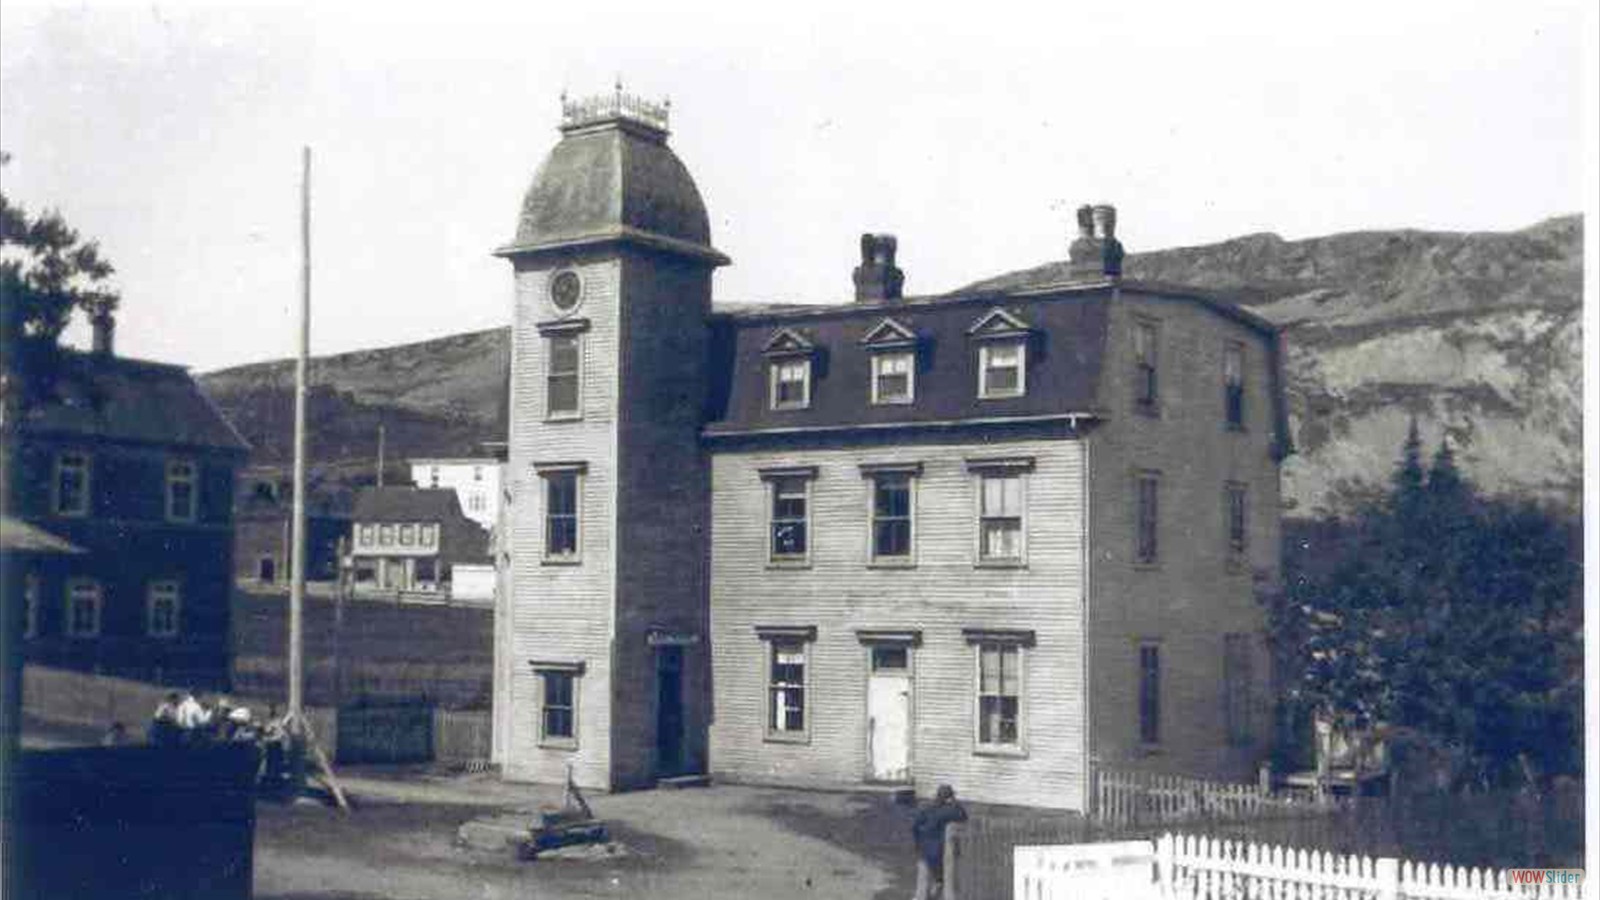 Front of Court House with Tower - pre-1950